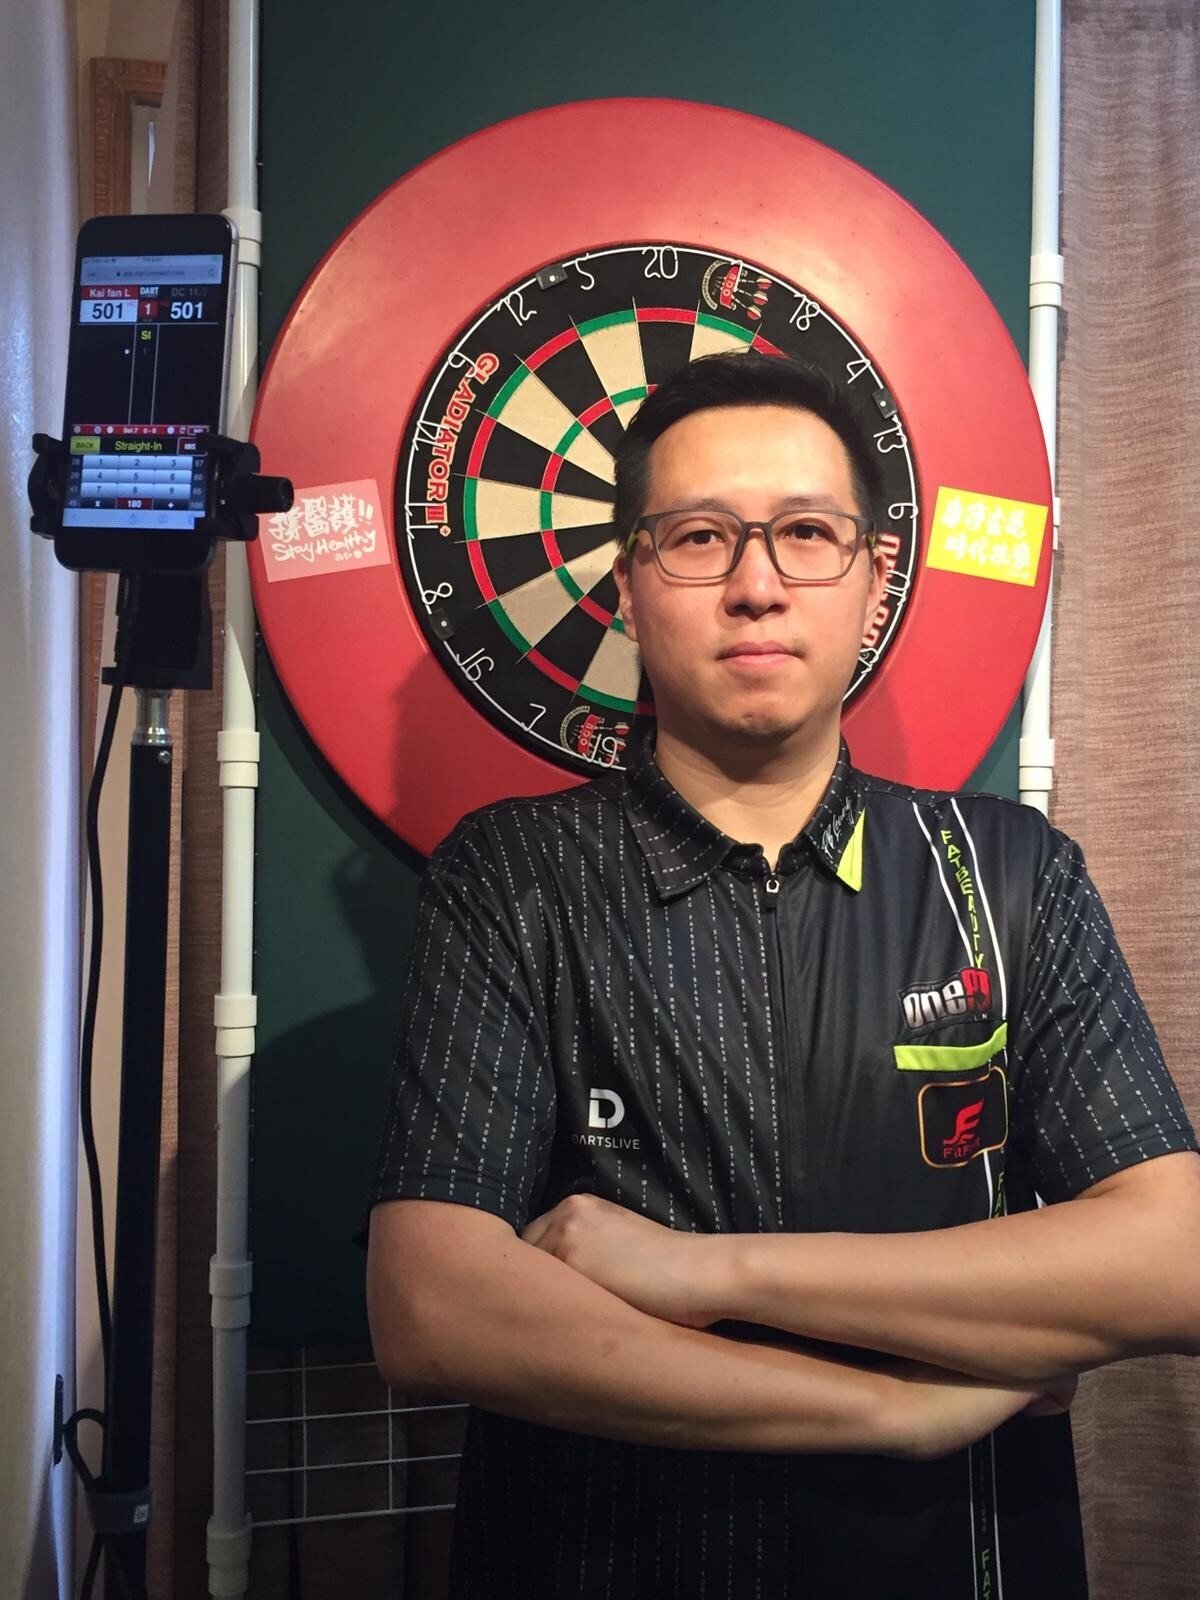 Hong Kong’s Kevin Leung Kai-fan is ranked 82nd on the PDC money list after the eighth event of the Players Championship series. Photo: Handout